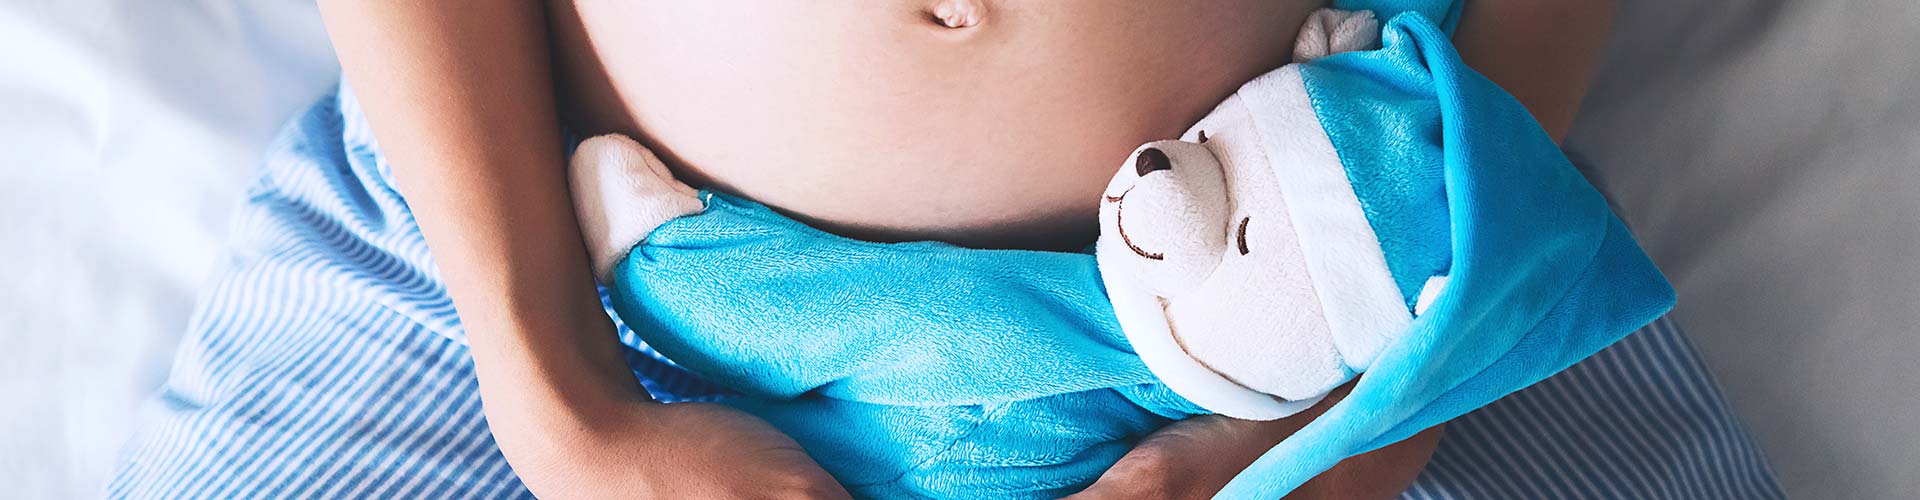 Pregnant woman's belly with teddy toy bear.